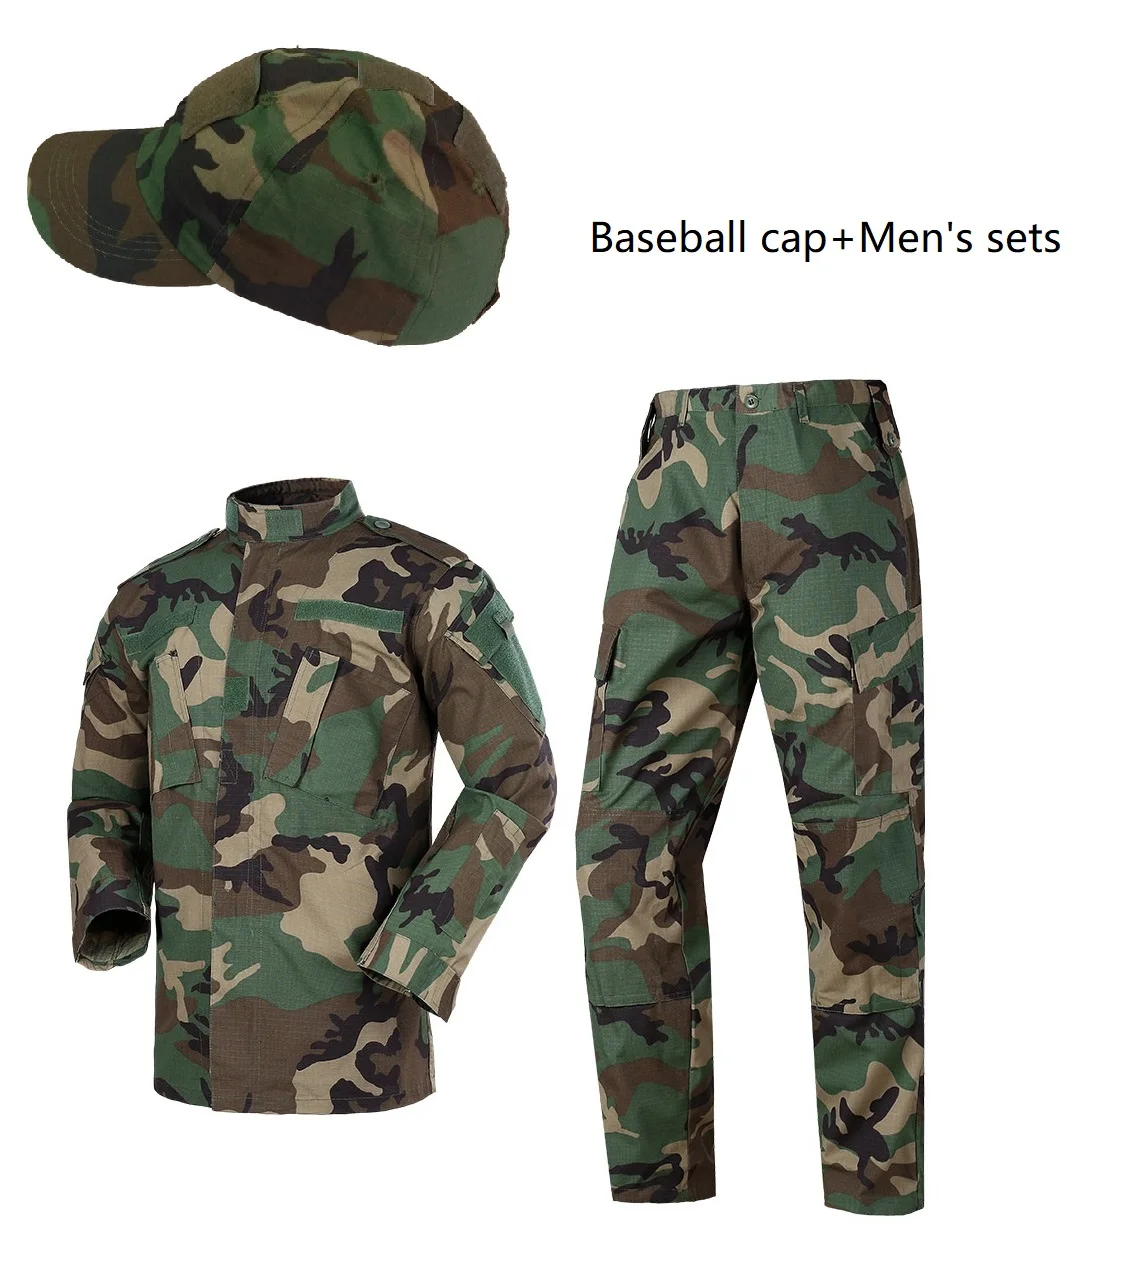 Men's Sets Woodland Camouflage ACU Military Uiforms With Tactical Baseball Cap